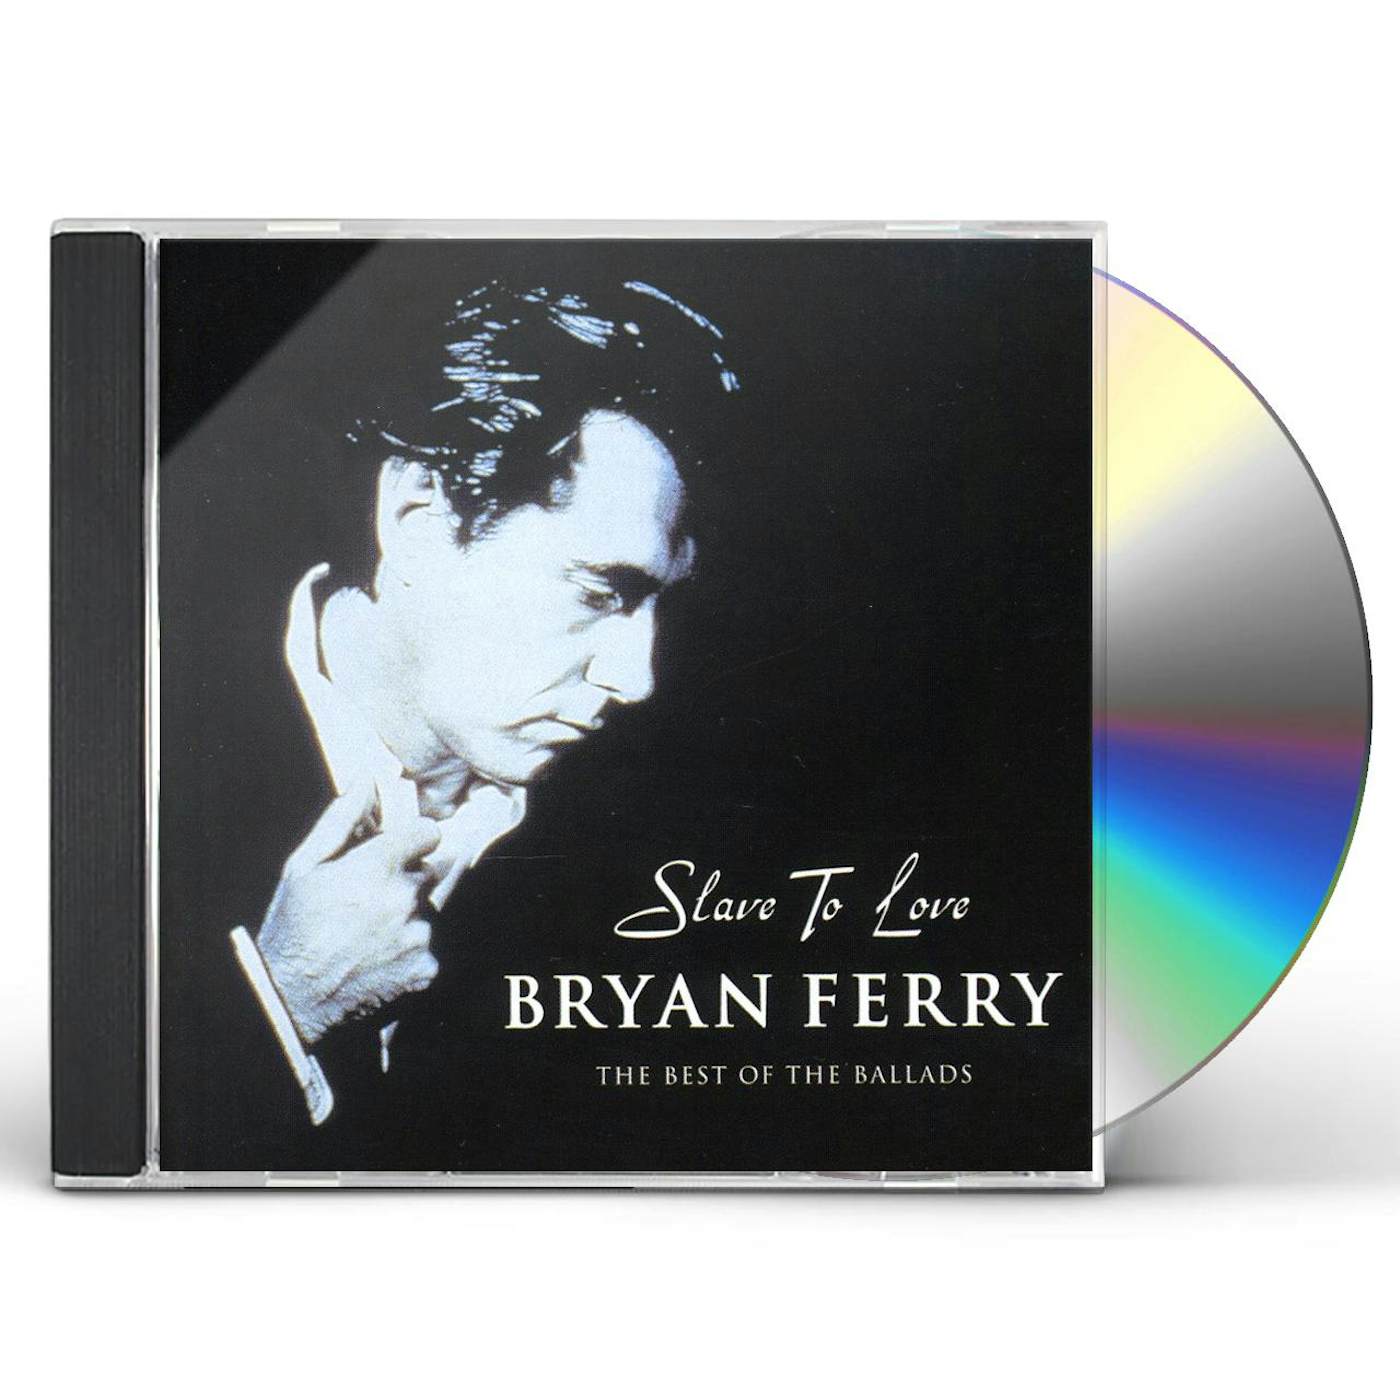 Bryan Ferry SLAVE TO LOVE: BEST OF THE BALLADS CD